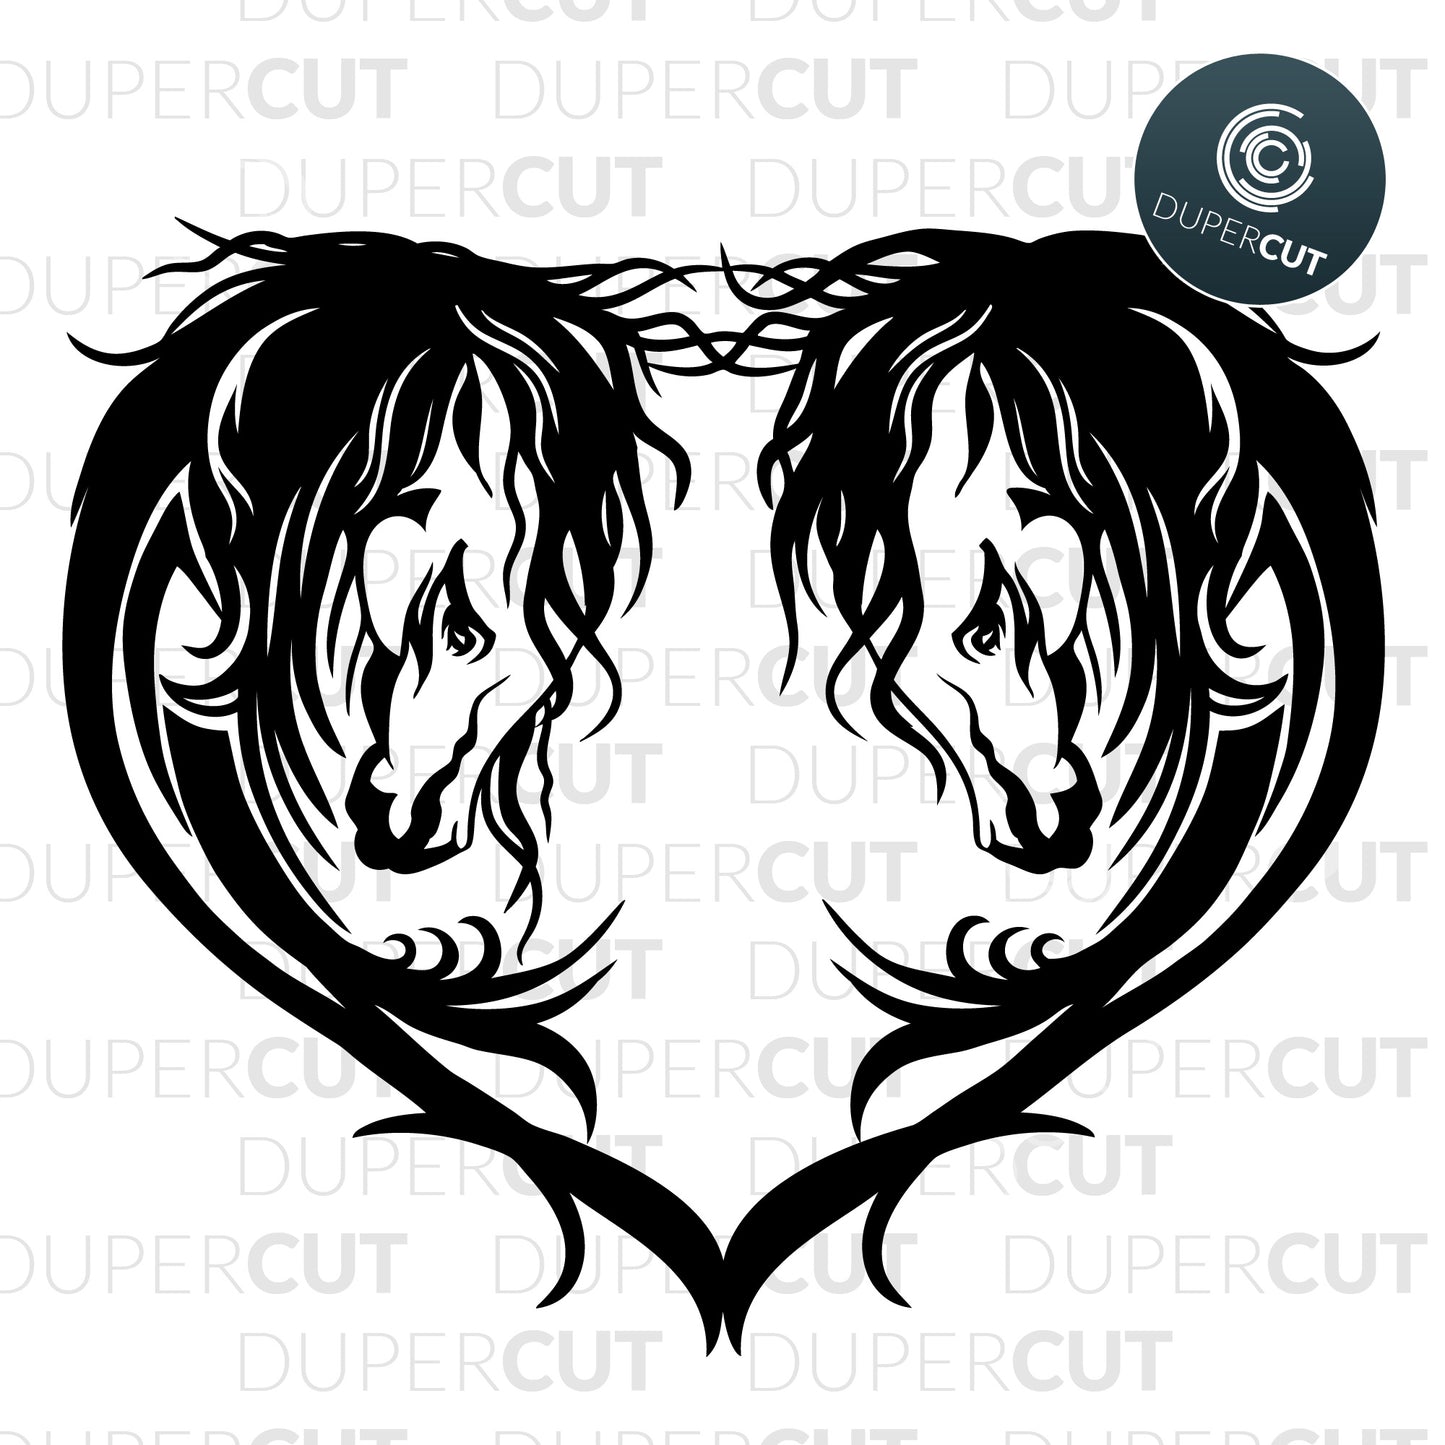 Heart shaped horses, tribal vector design. SVG PNG DXF files Paper cutting template for personal or commercial use. Vinyl template cutting files for Cricut, Glowforge, Silhouette, CNC